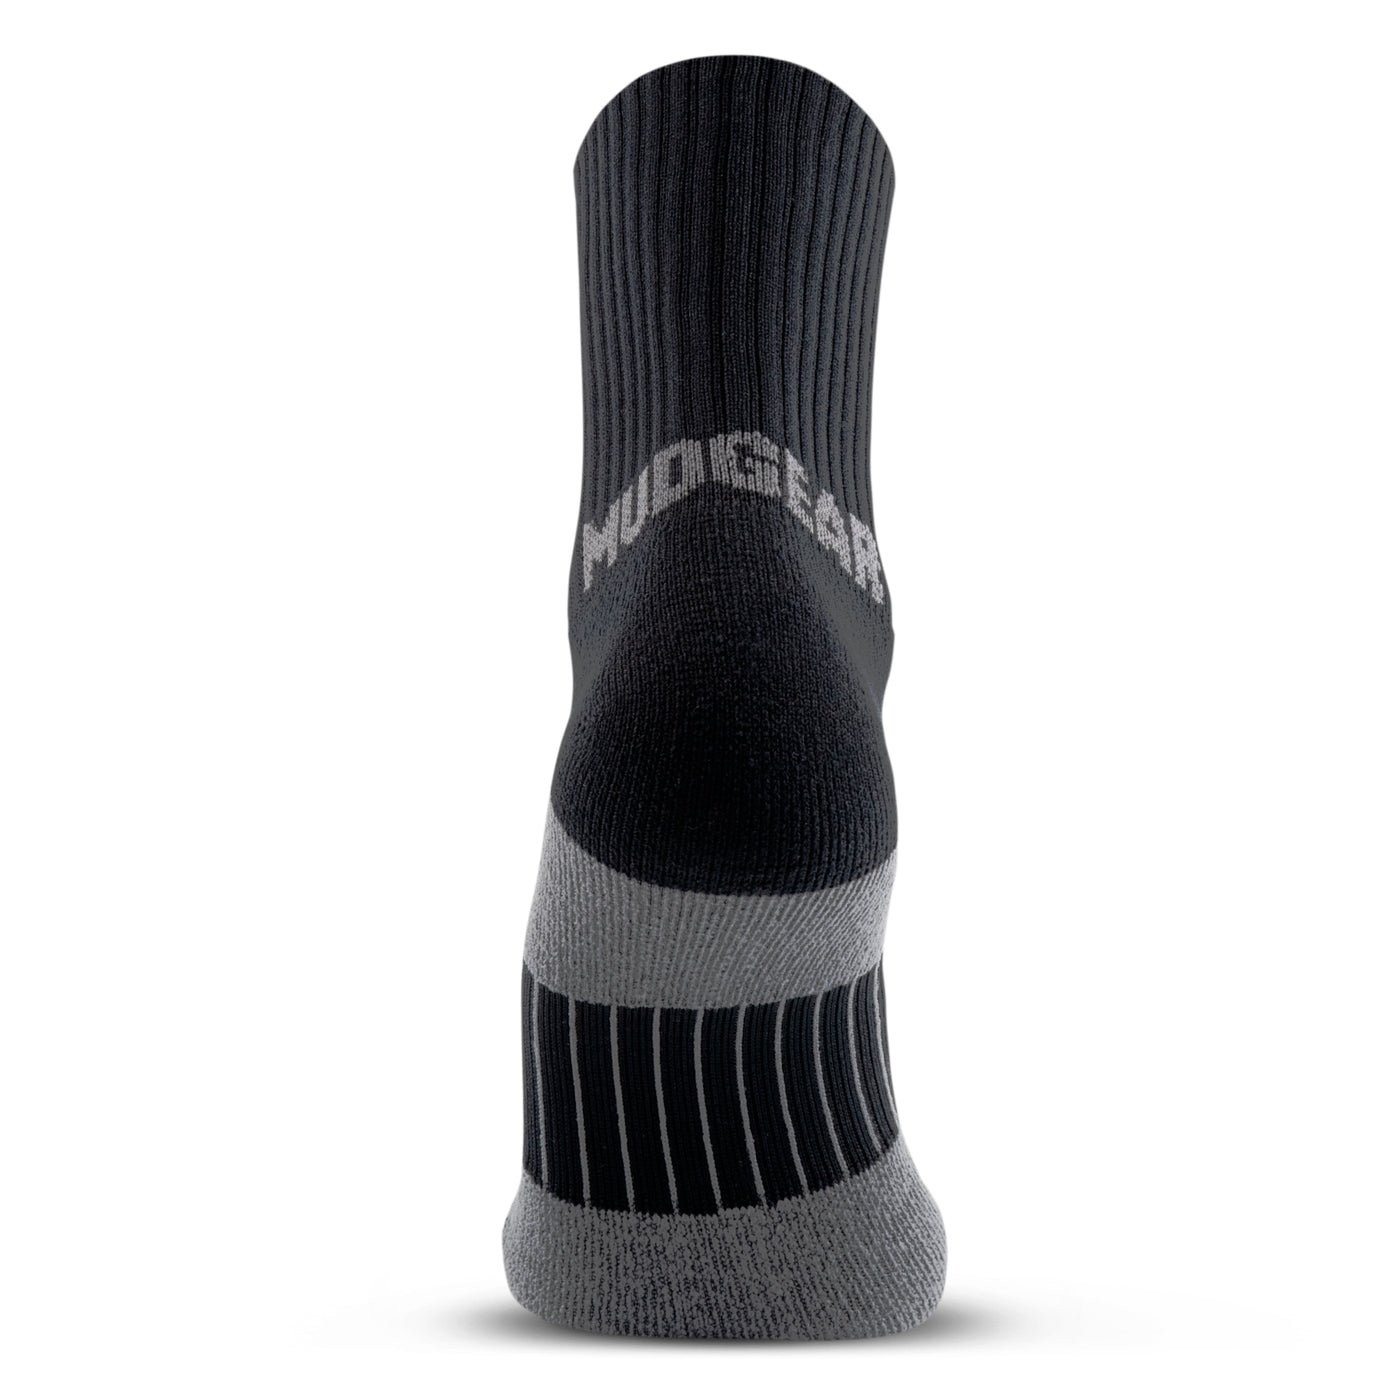 Obstacle 5" CREW HEIGHT TRAIL RUNNING SOCK - Mudgear